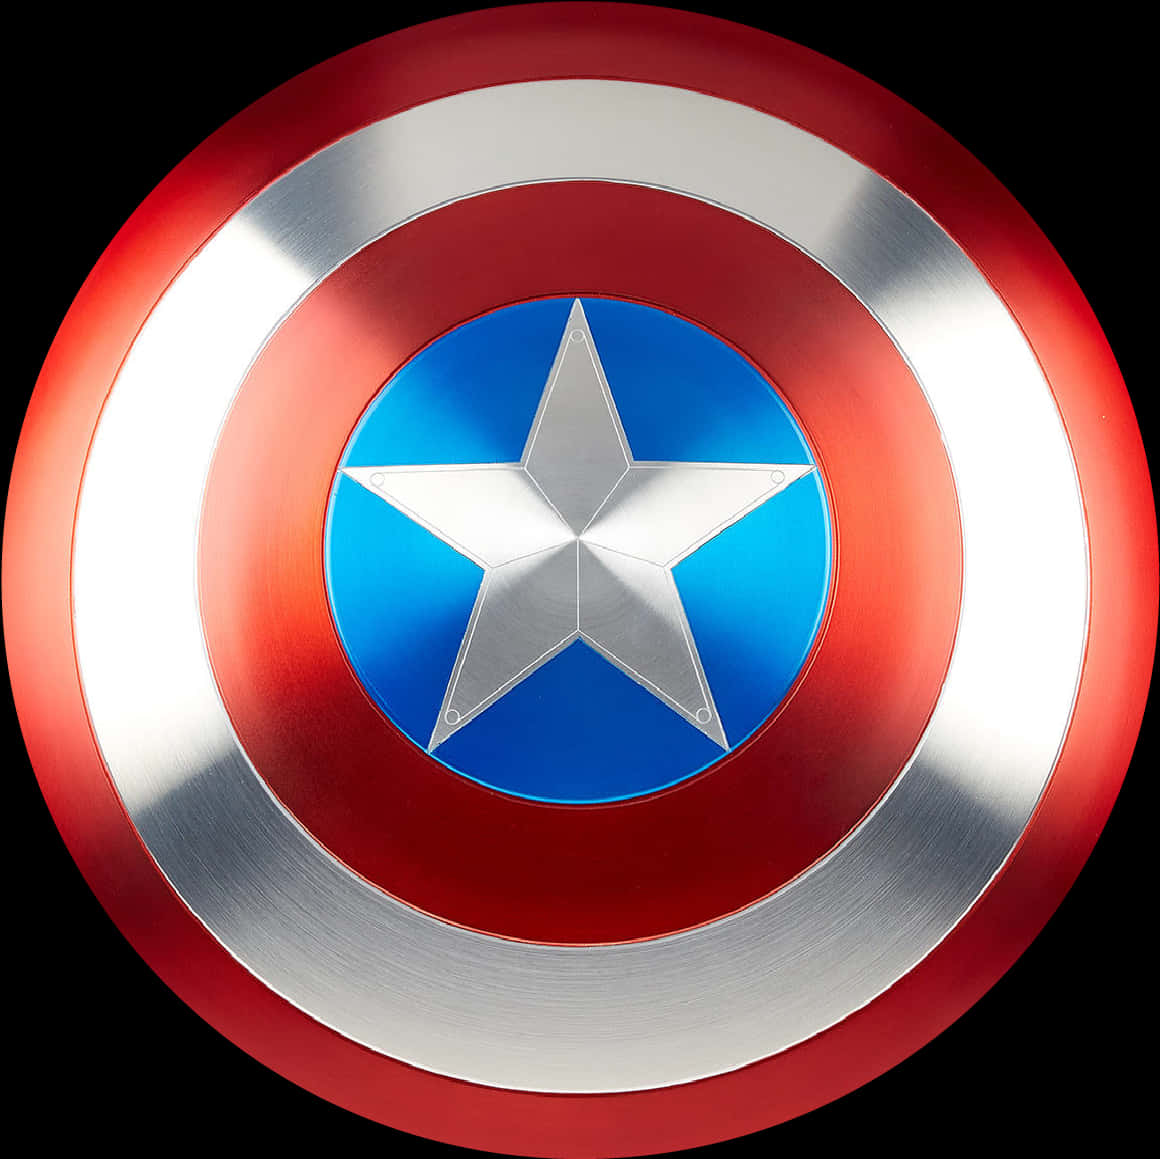 Captain America Shield Iconic Symbol PNG